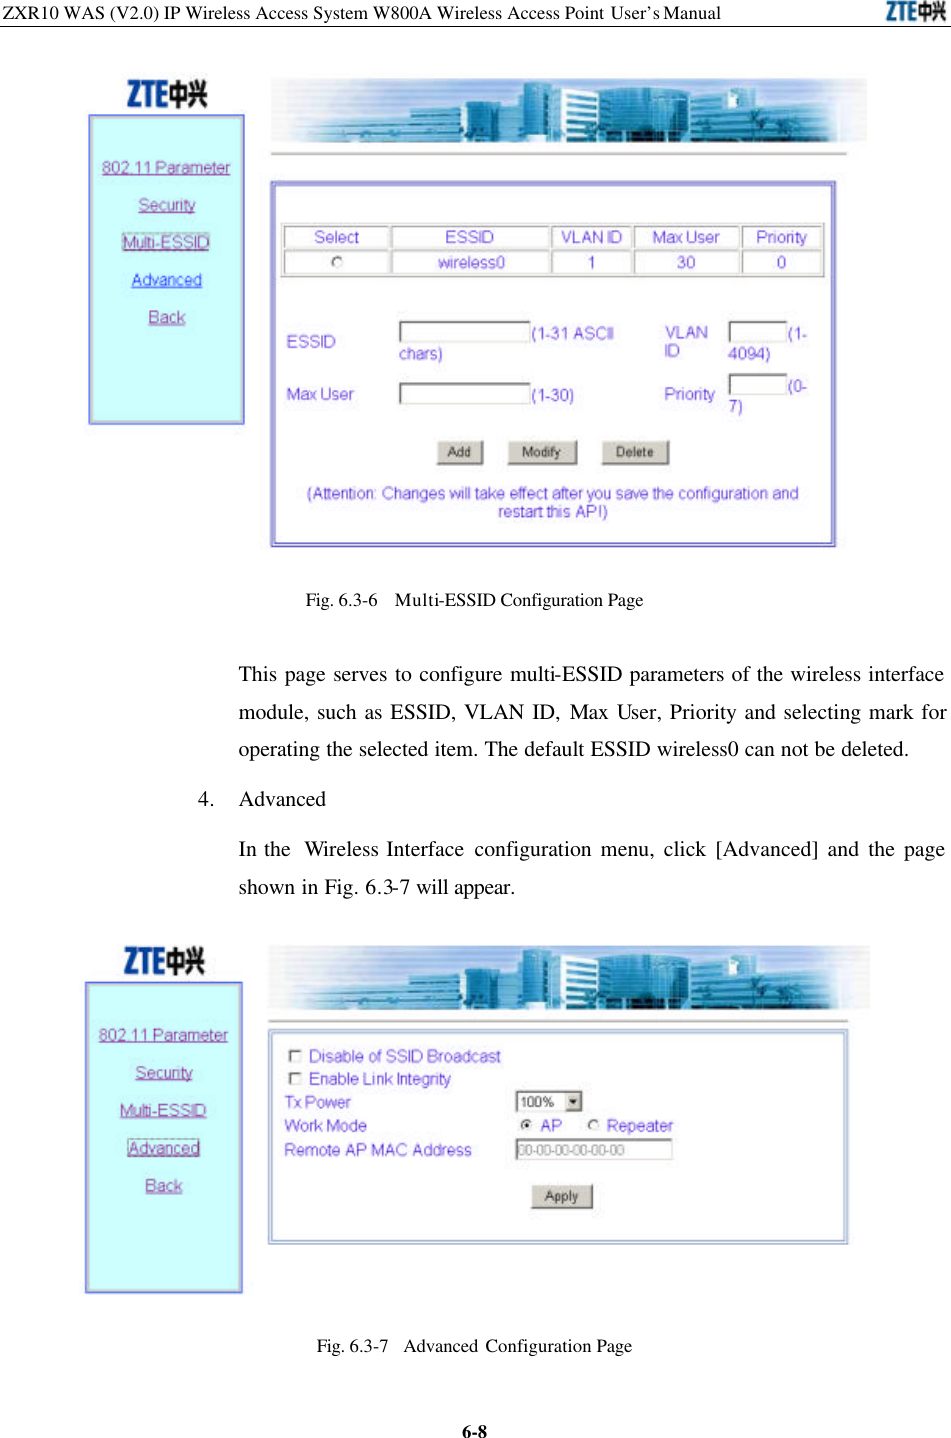 ZXR10 WAS (V2.0) IP Wireless Access System W800A Wireless Access Point User’s Manual  6-8 Fig. 6.3-6  Multi-ESSID Configuration Page This page serves to configure multi-ESSID parameters of the wireless interface module, such as ESSID, VLAN ID, Max User, Priority and selecting mark for operating the selected item. The default ESSID wireless0 can not be deleted.   4. Advanced In the  Wireless Interface configuration menu, click [Advanced] and the page shown in Fig. 6.3-7 will appear.  Fig. 6.3-7  Advanced Configuration Page   